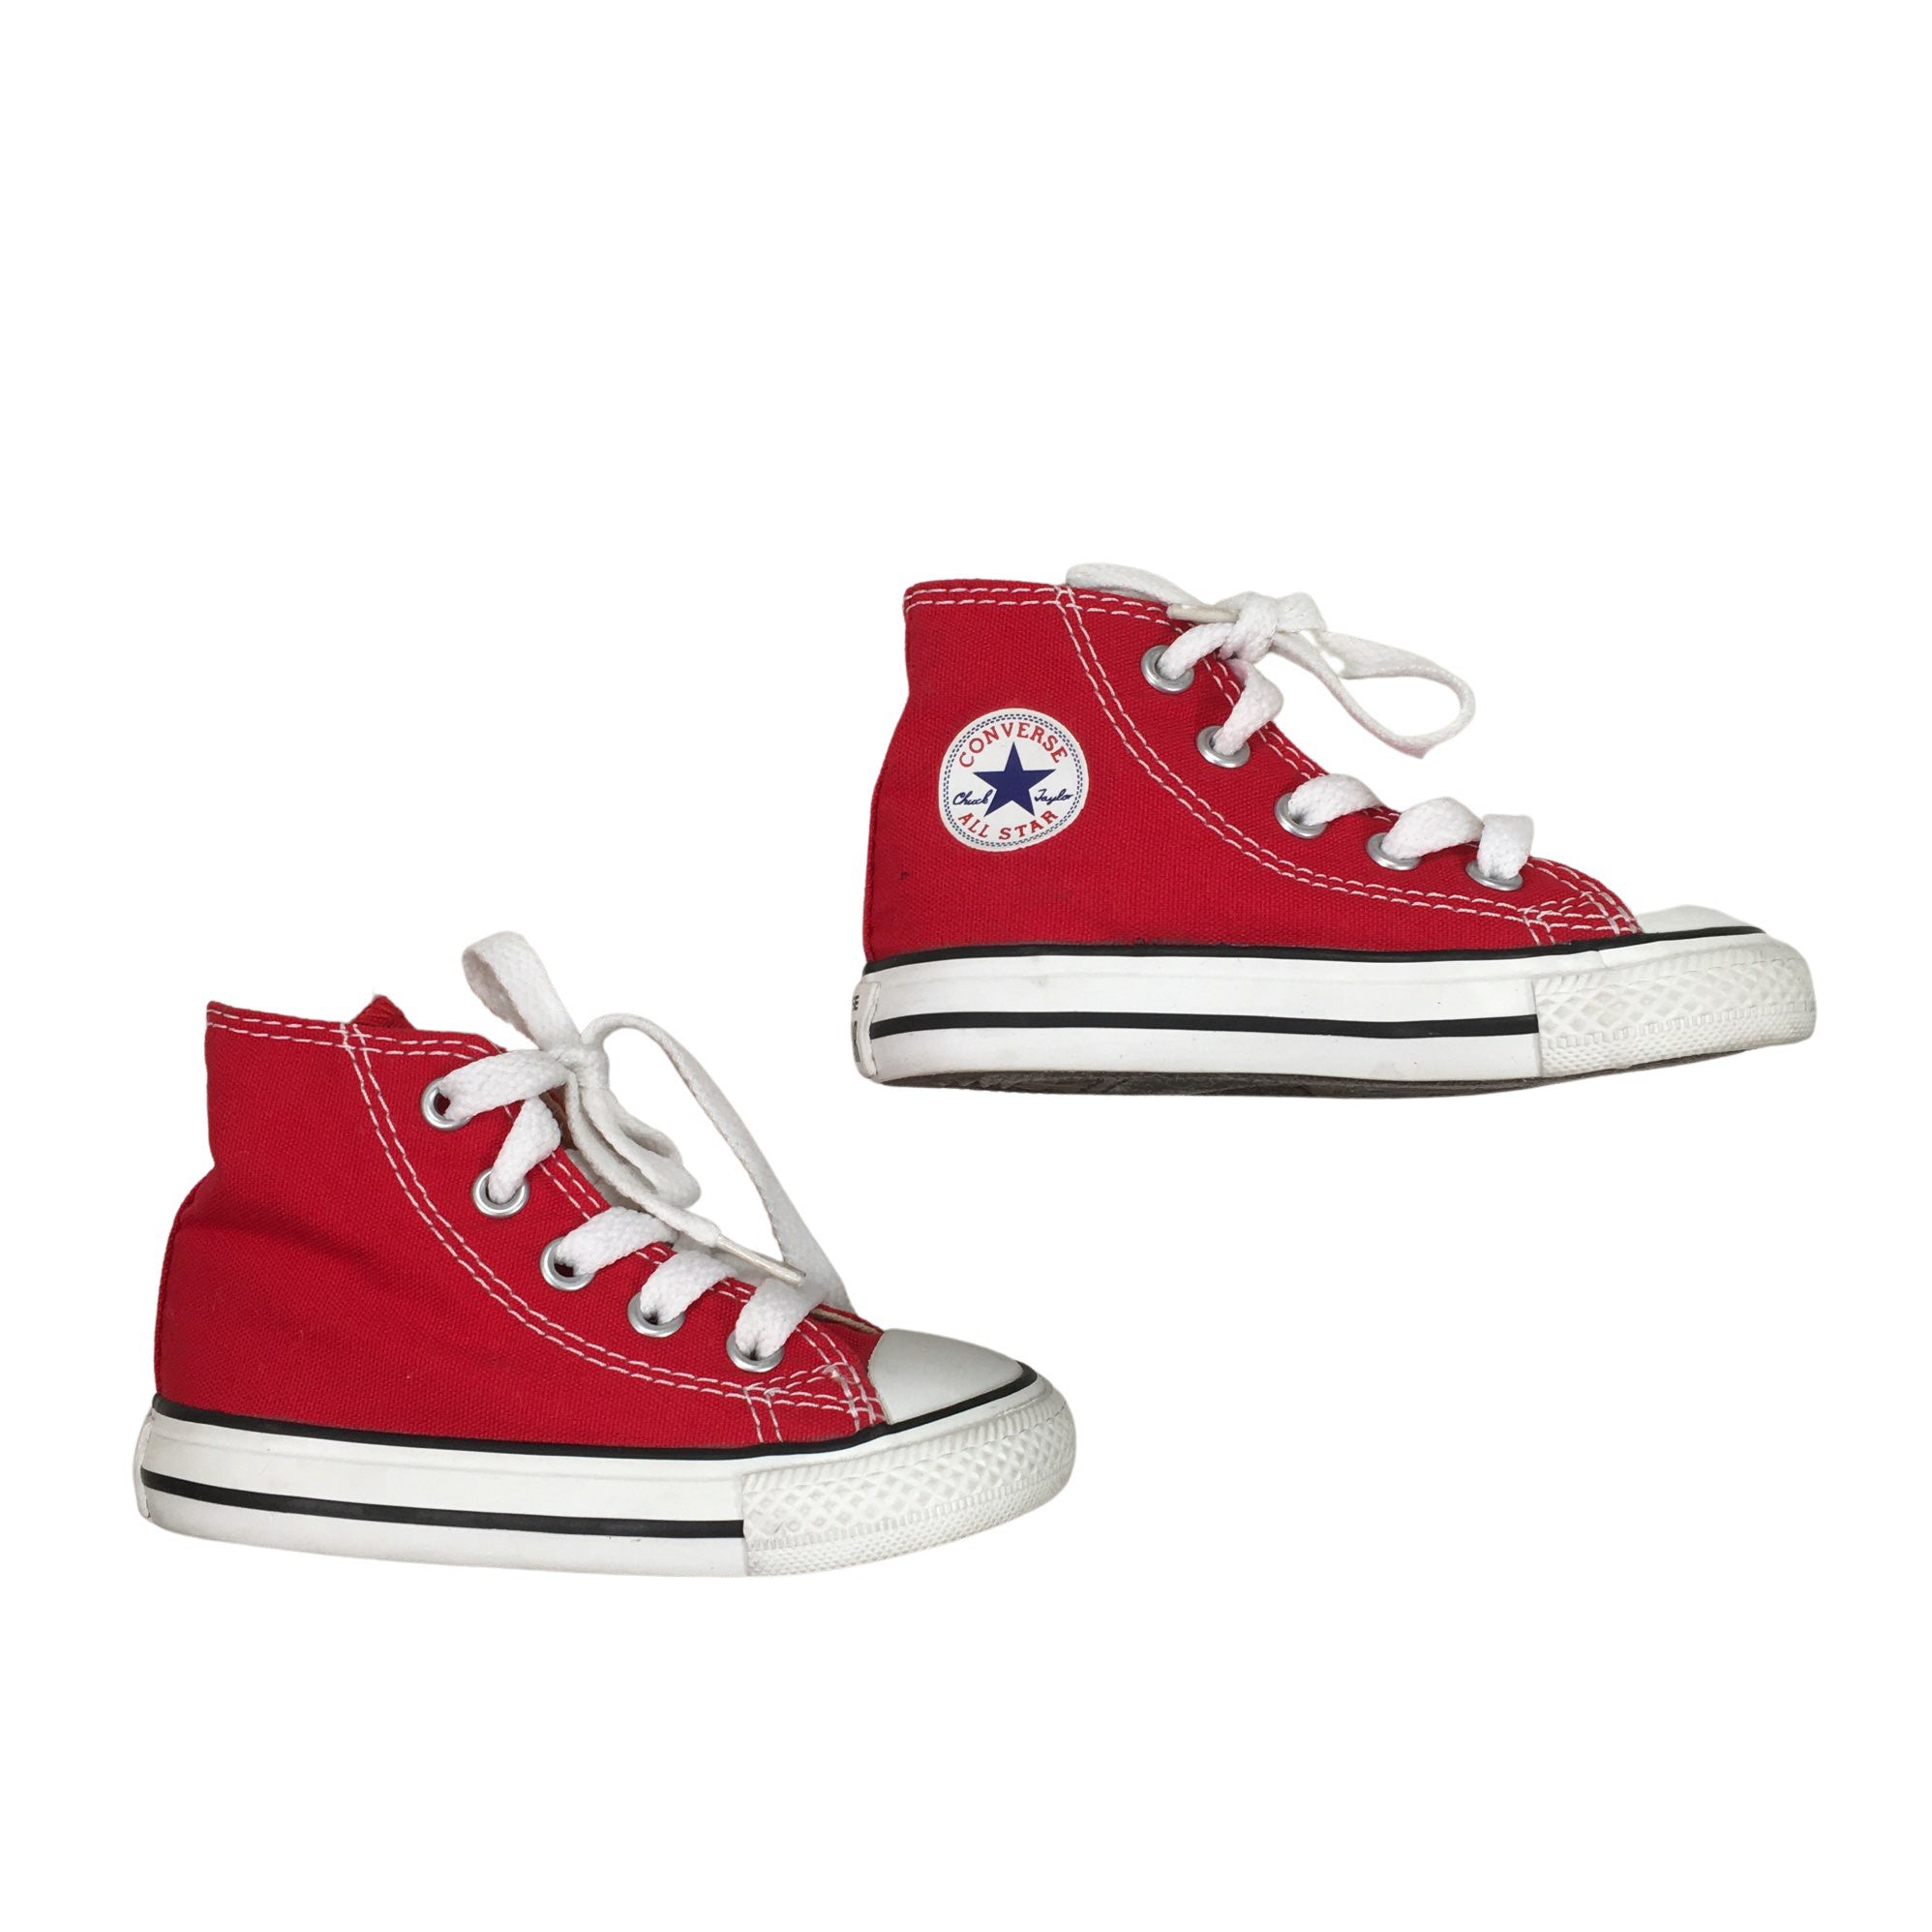 Unisex Converse sneakers, size 21 (Red) | Emmy